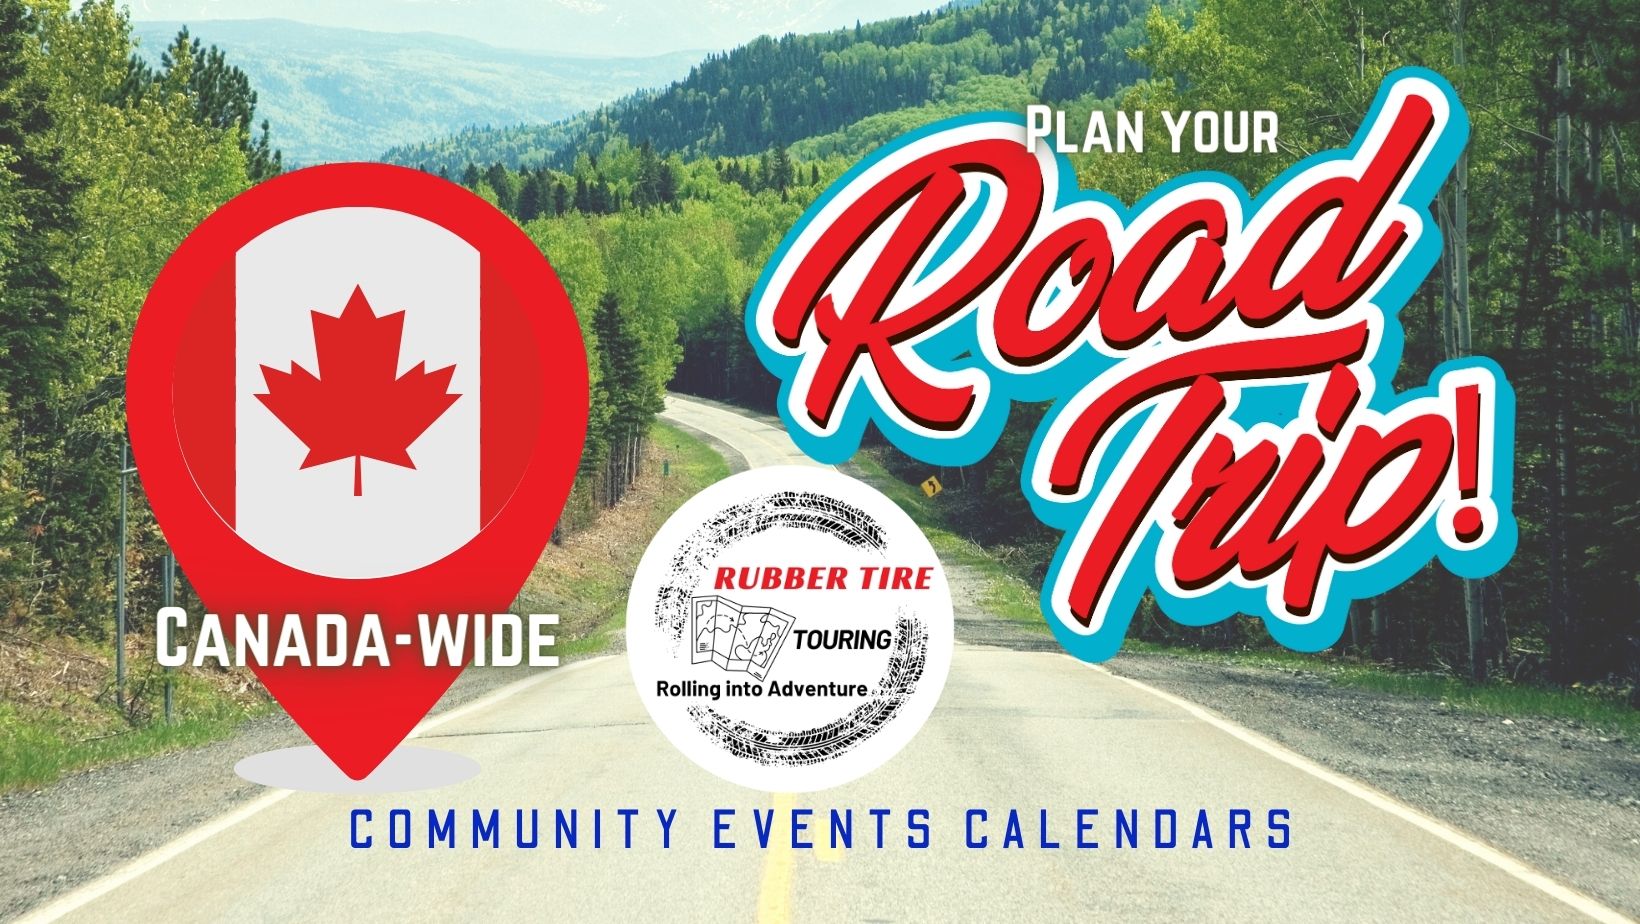 Canadian Events Calendars - Plan your Road Trip!